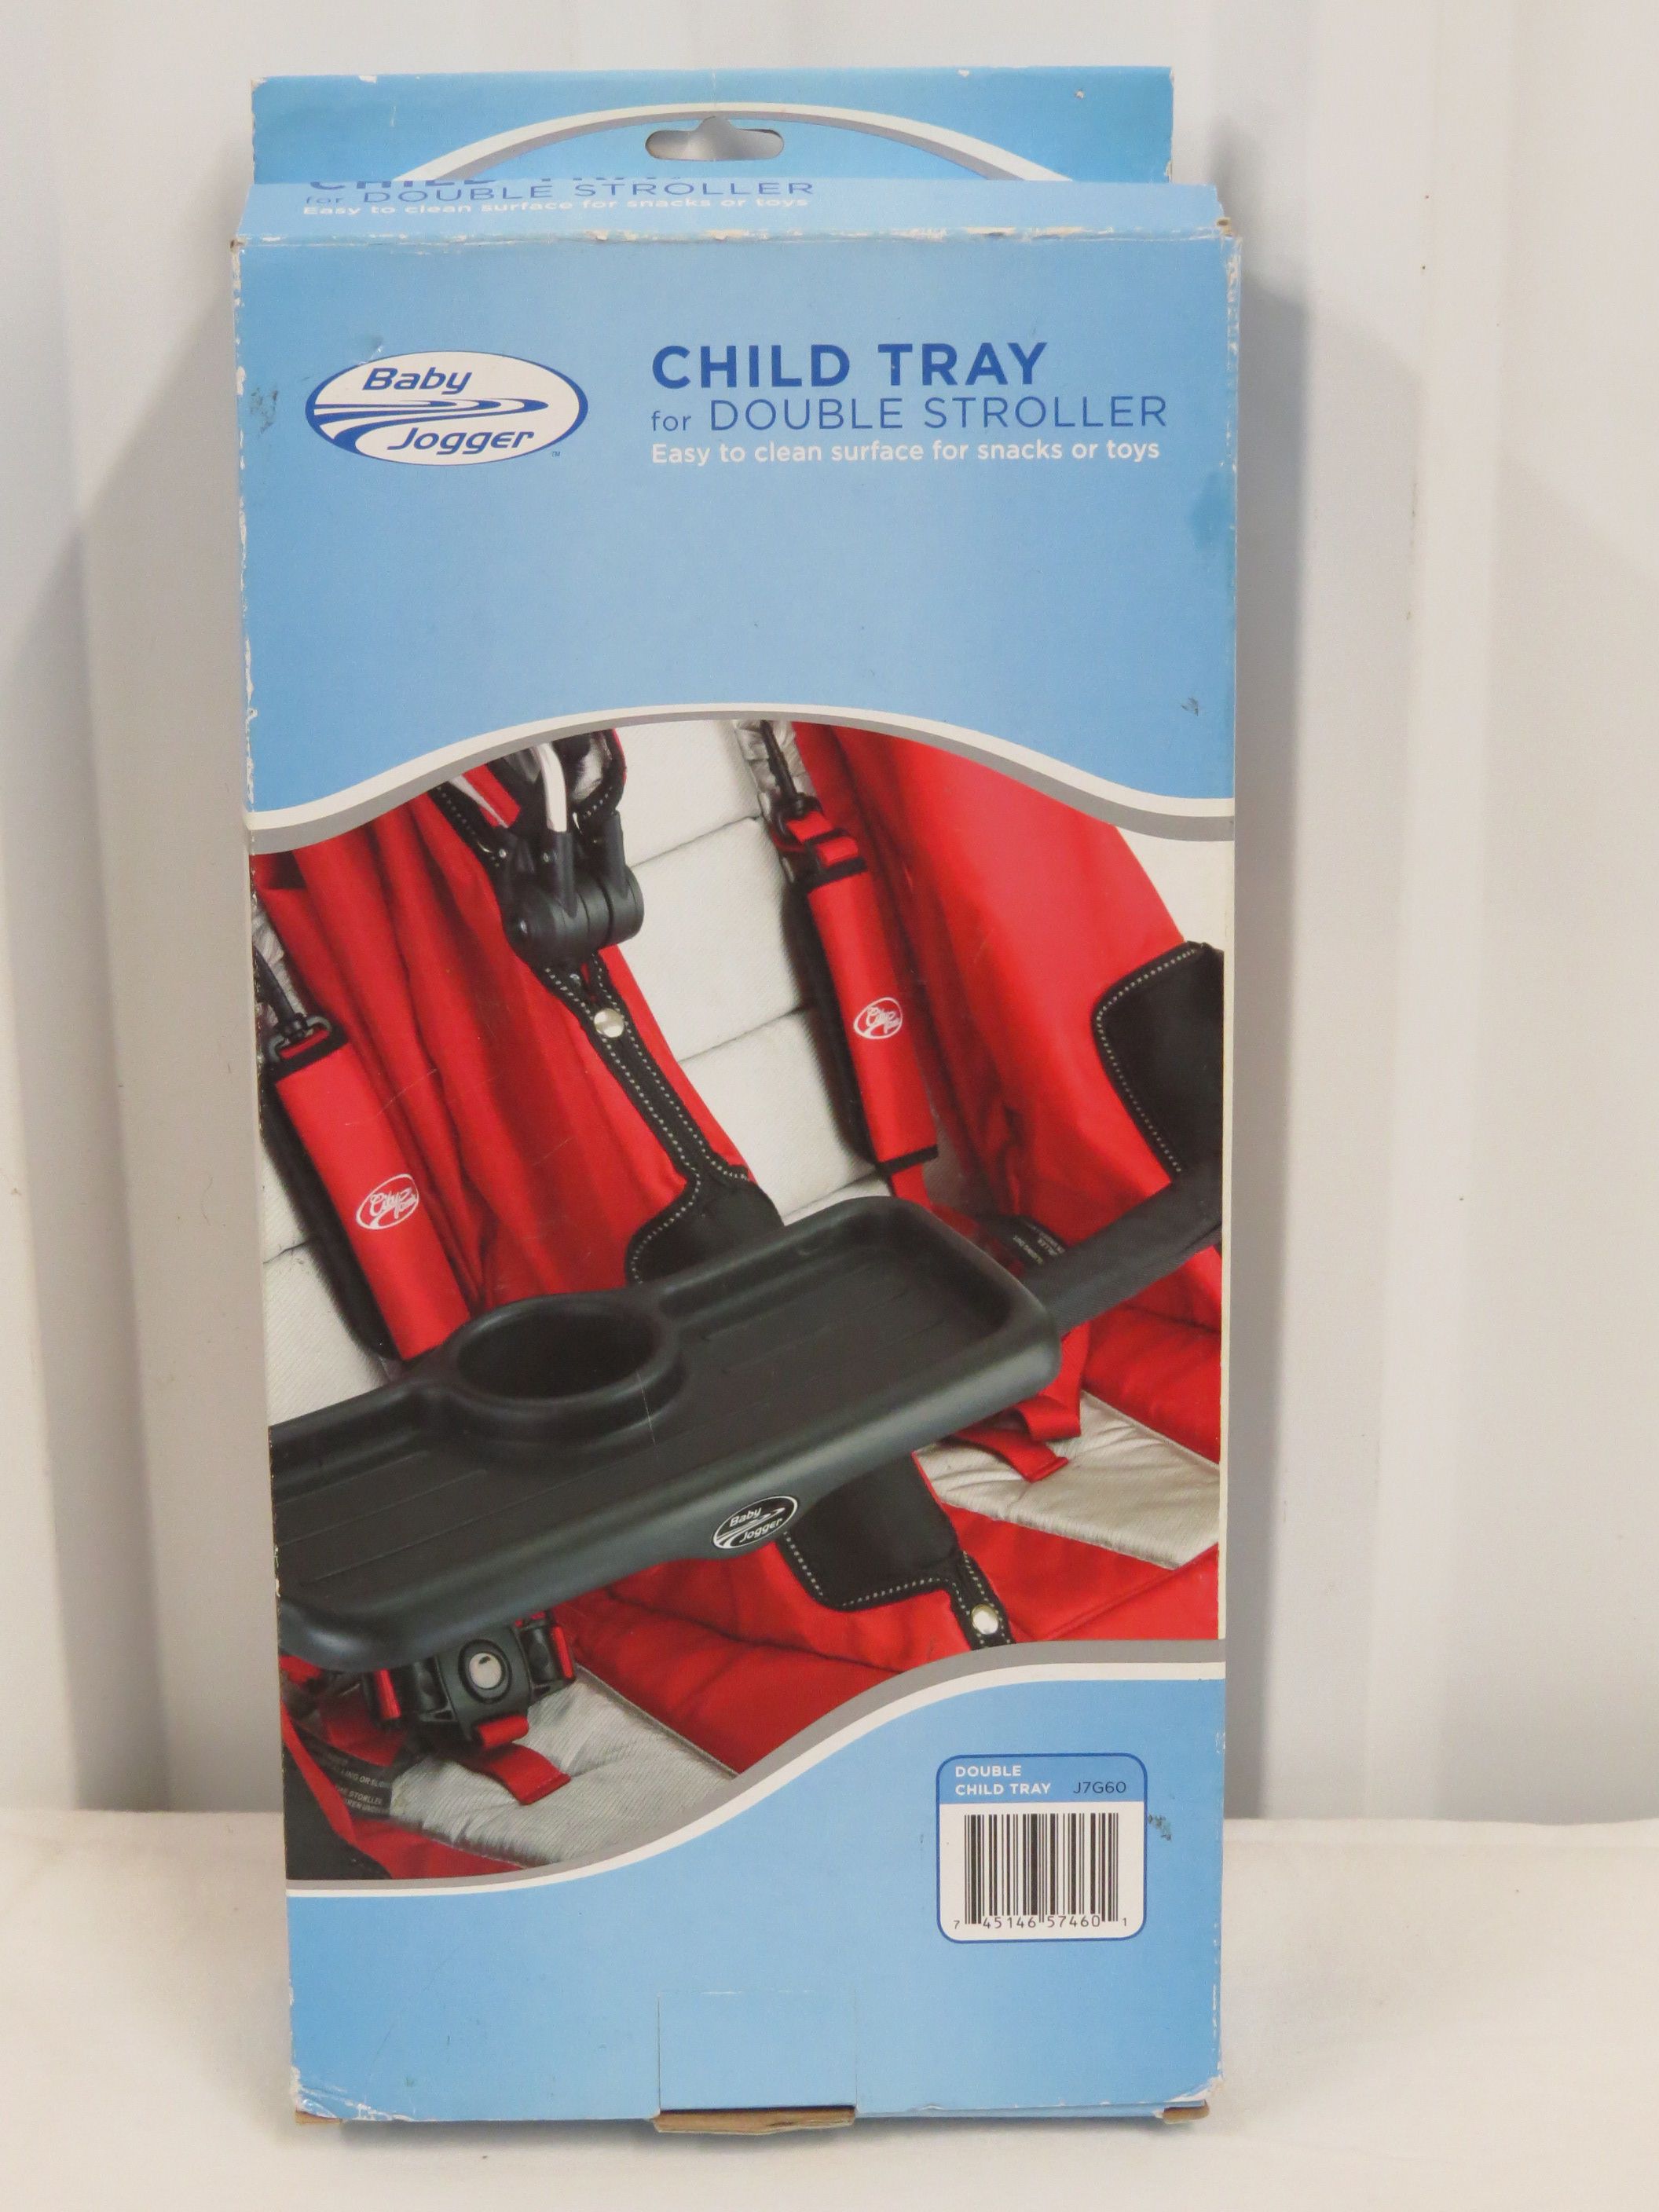 NIB Baby Jogger Double Stroller Child Tray Cup Holder Snack Tray